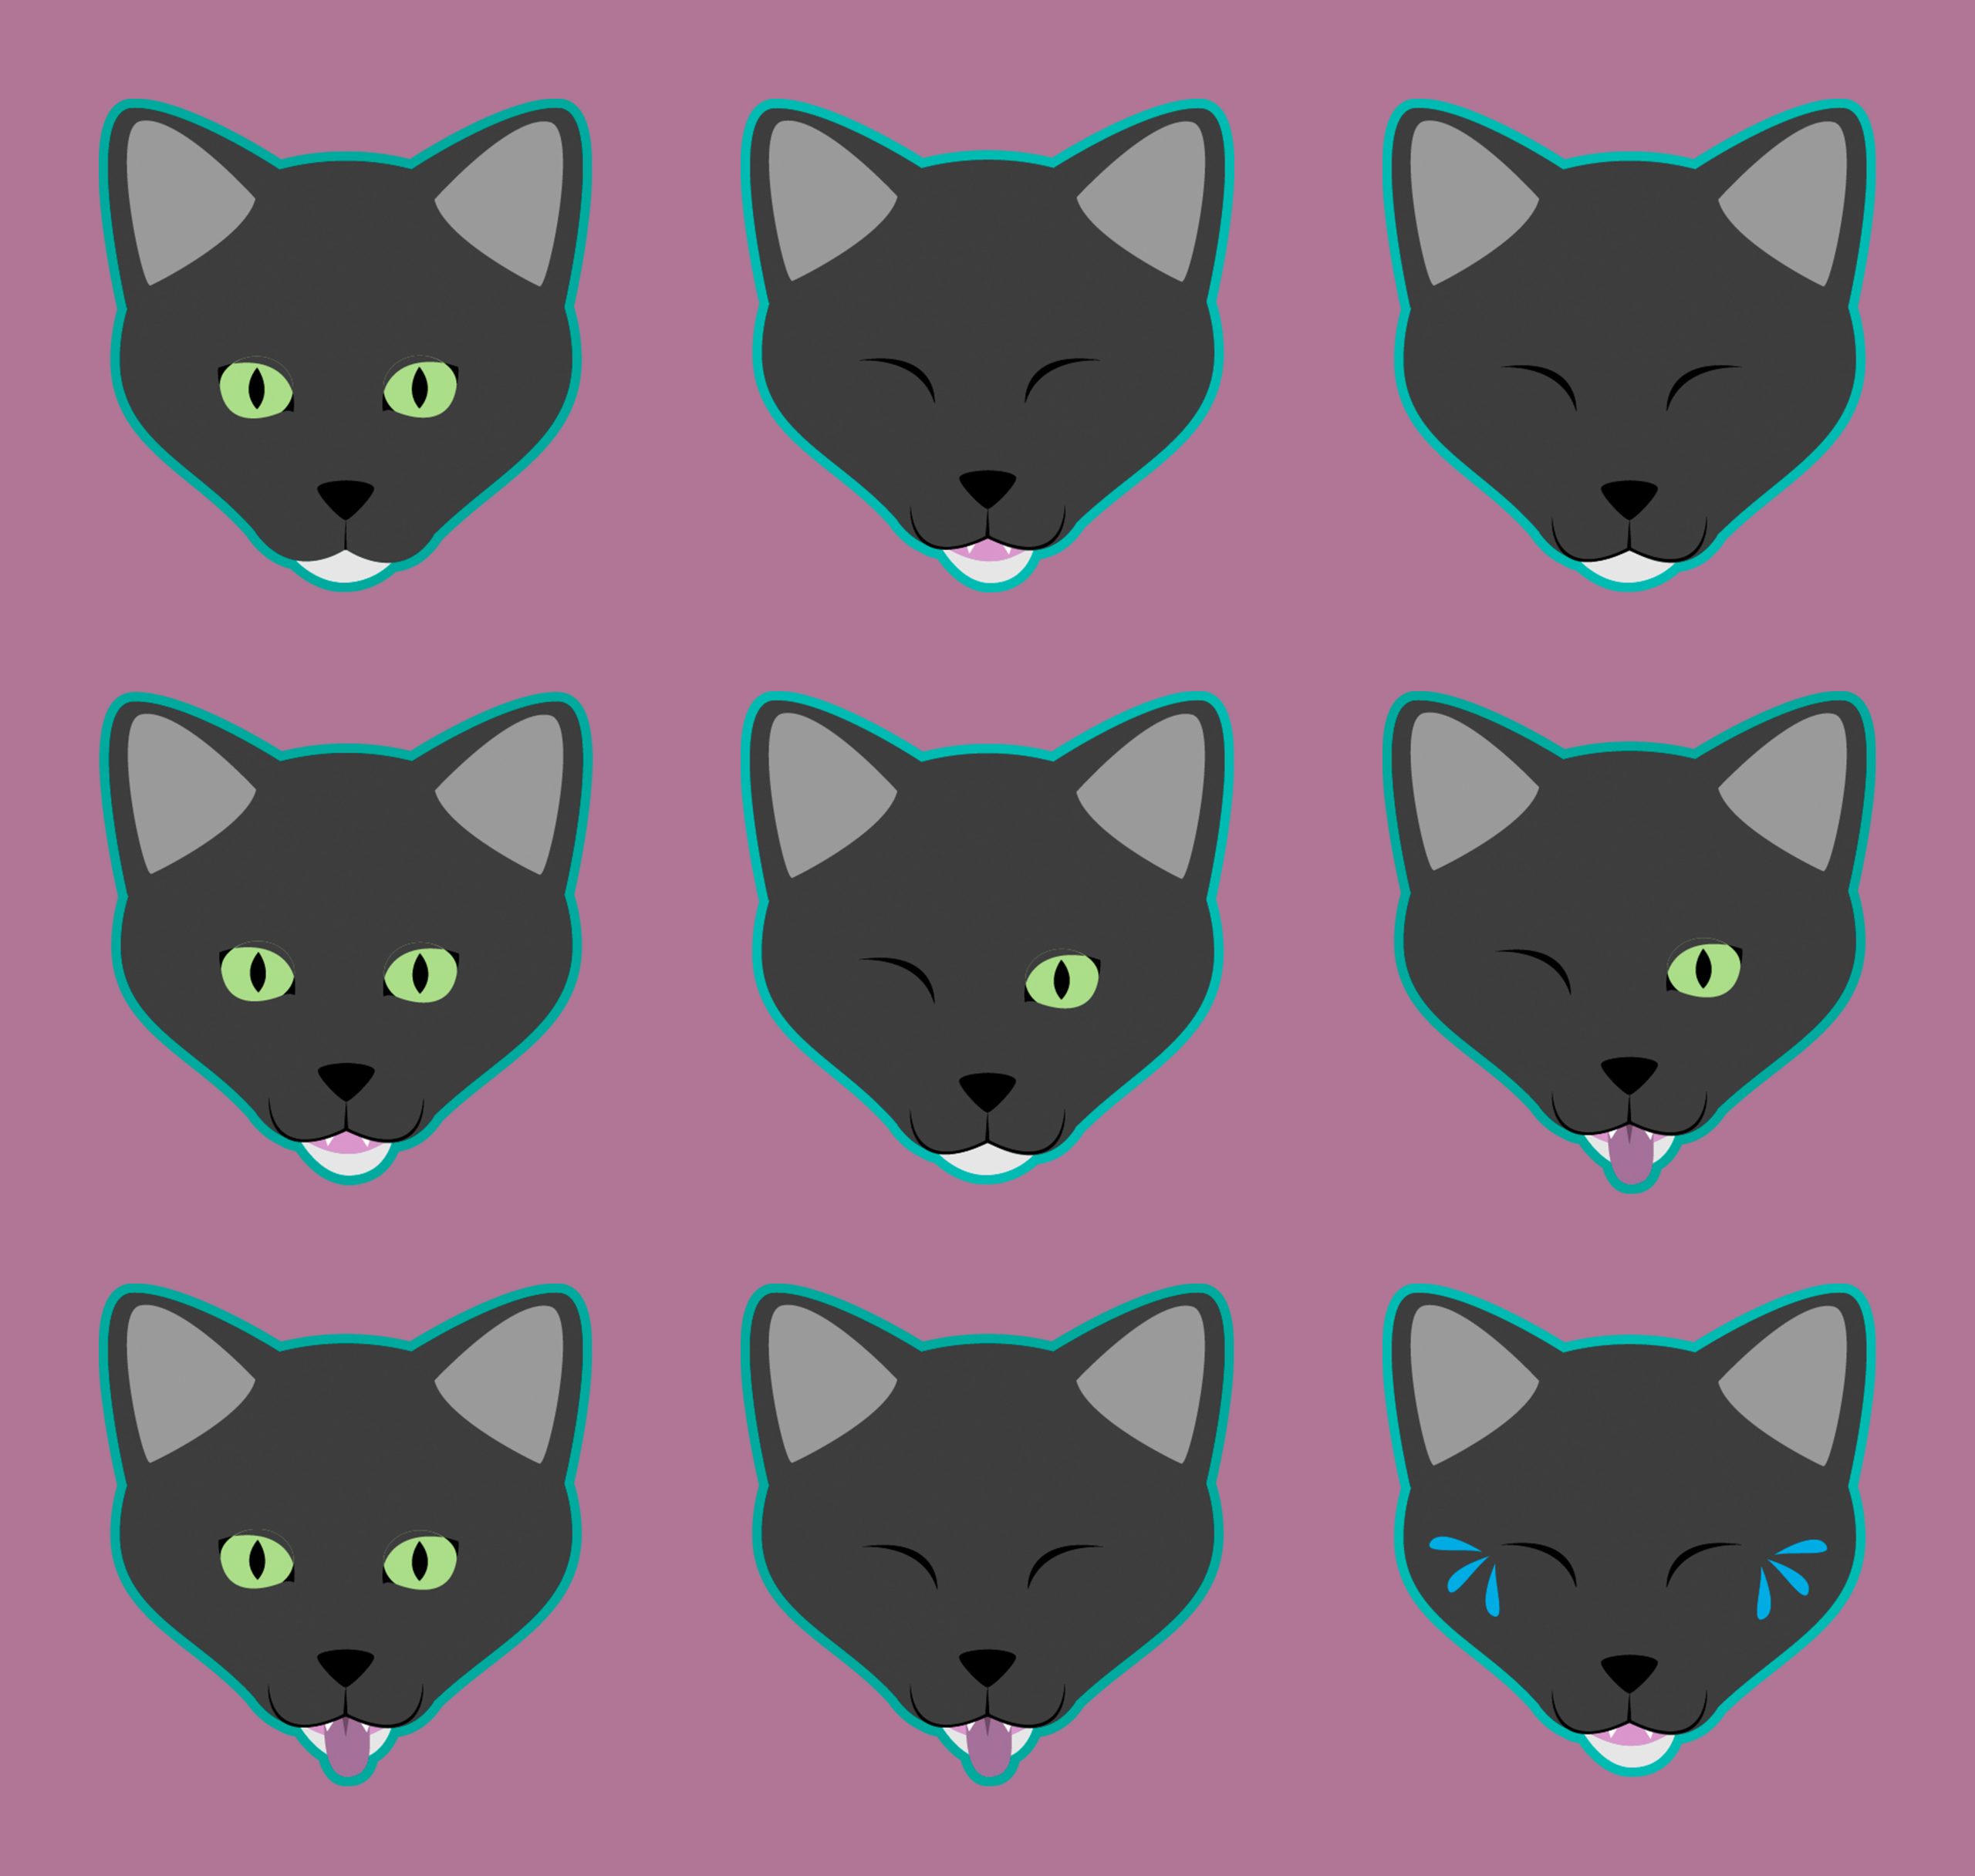 Henry the Black Cat Stickers